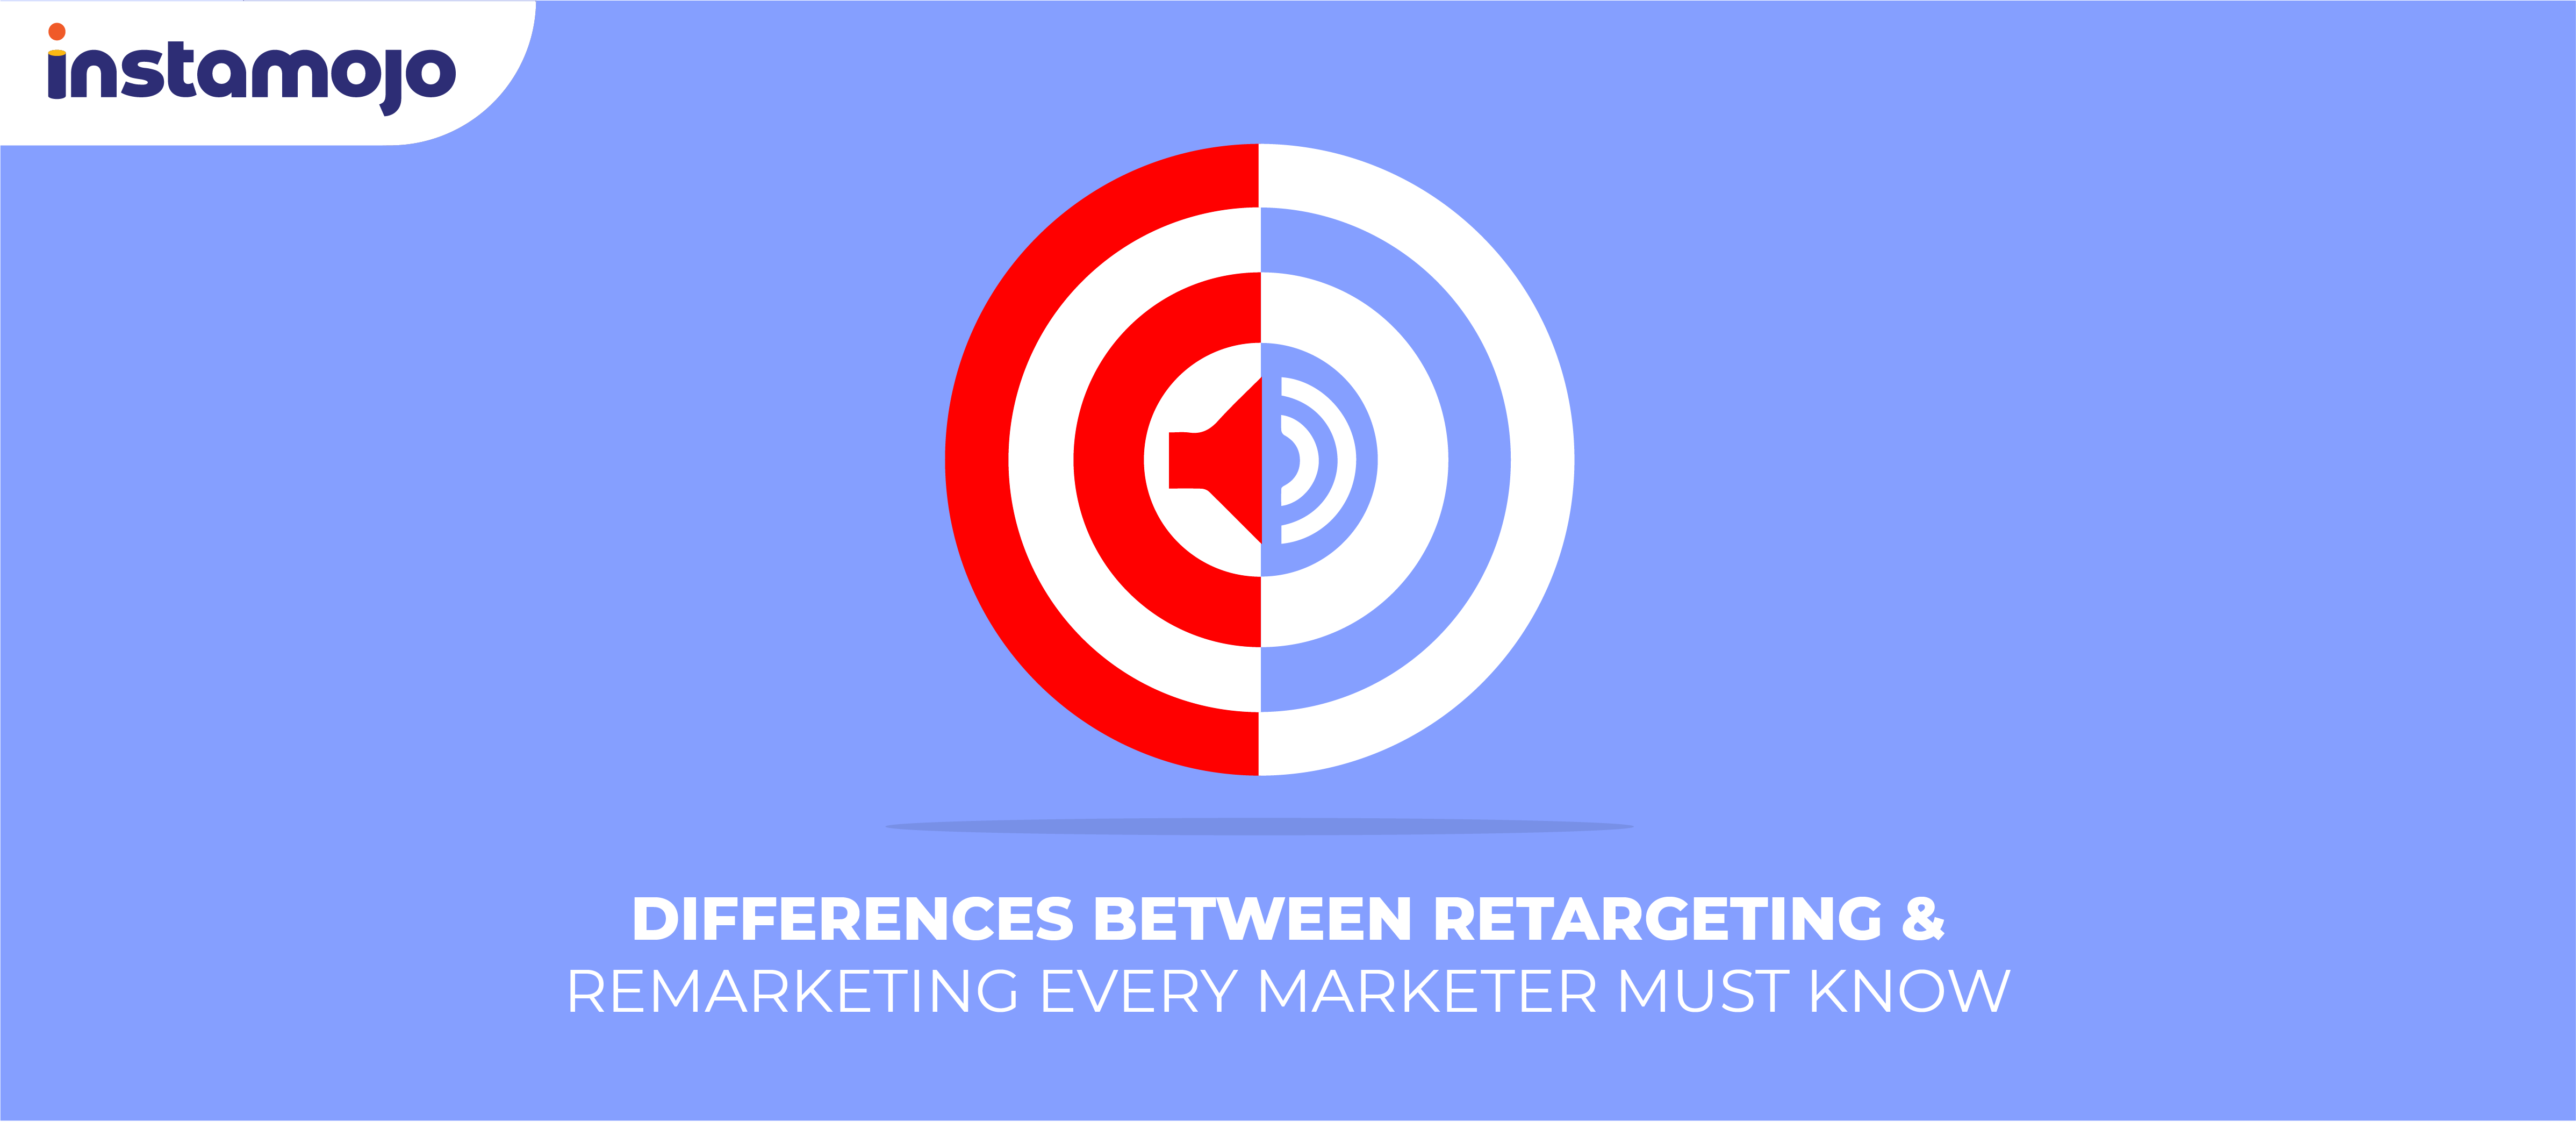 The differences between remarketing and retargeting that every marketer must know